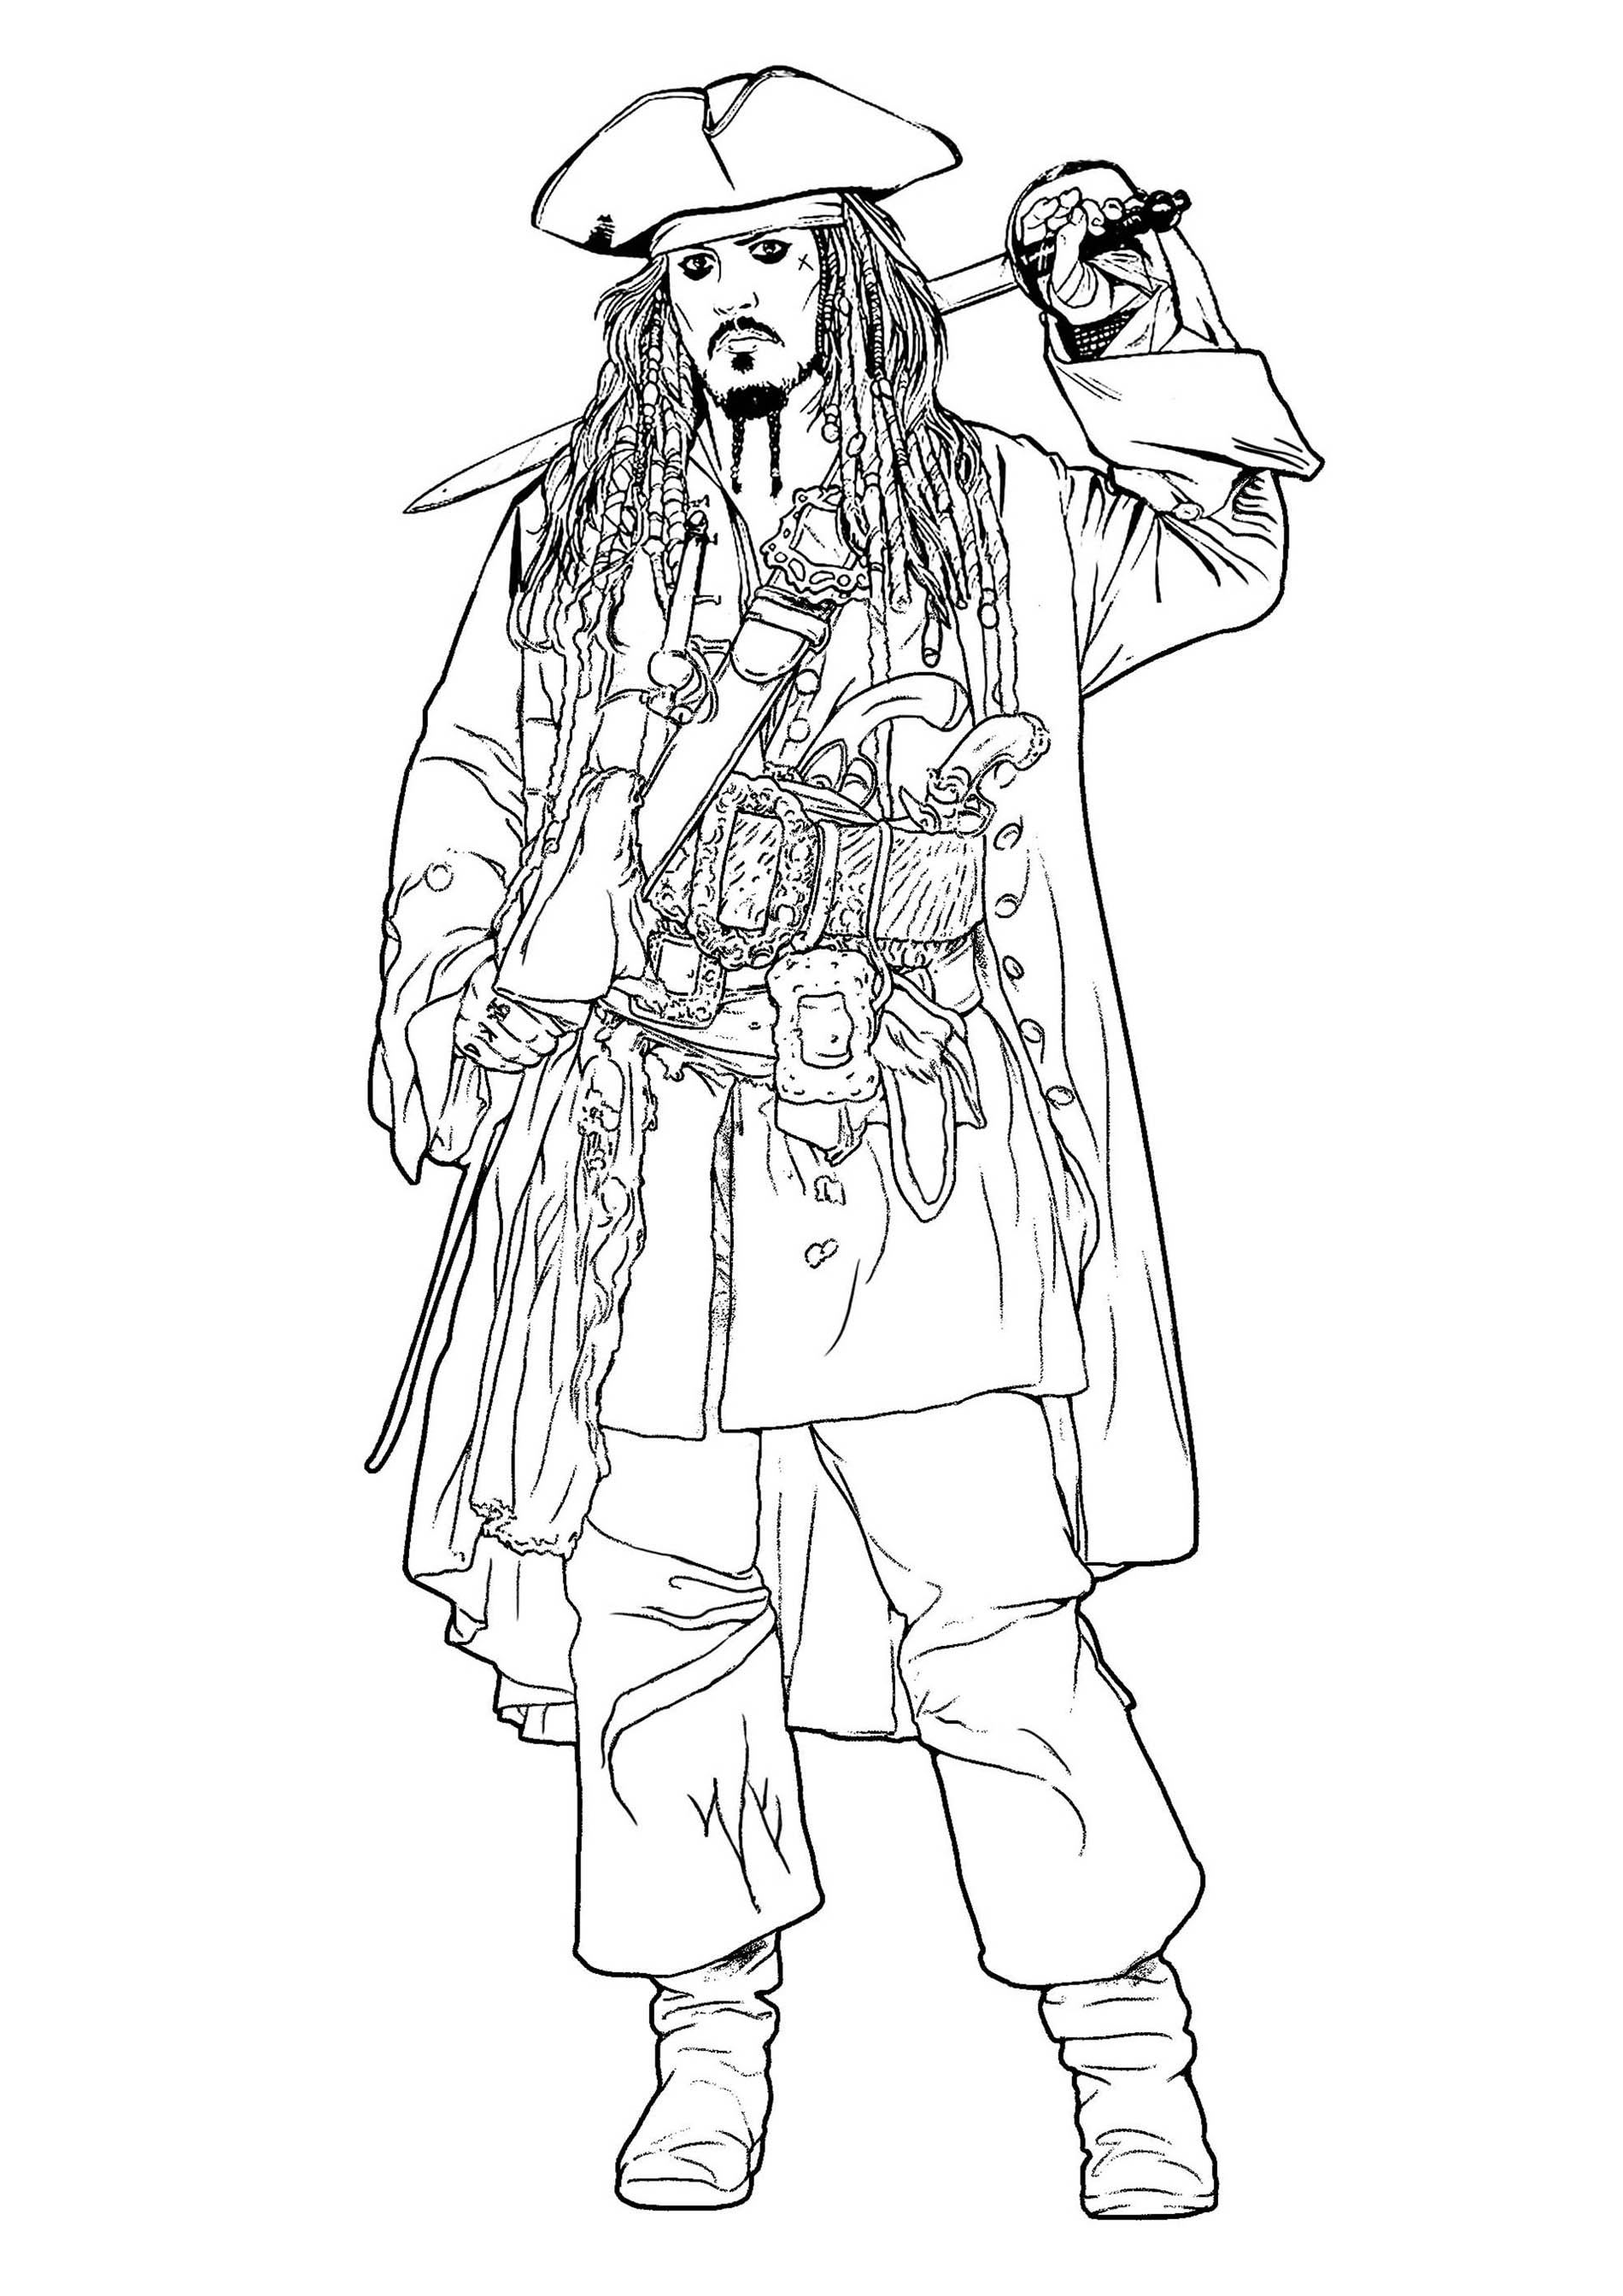 The hero of Pirates of the Caribbean is just waiting for some colors.